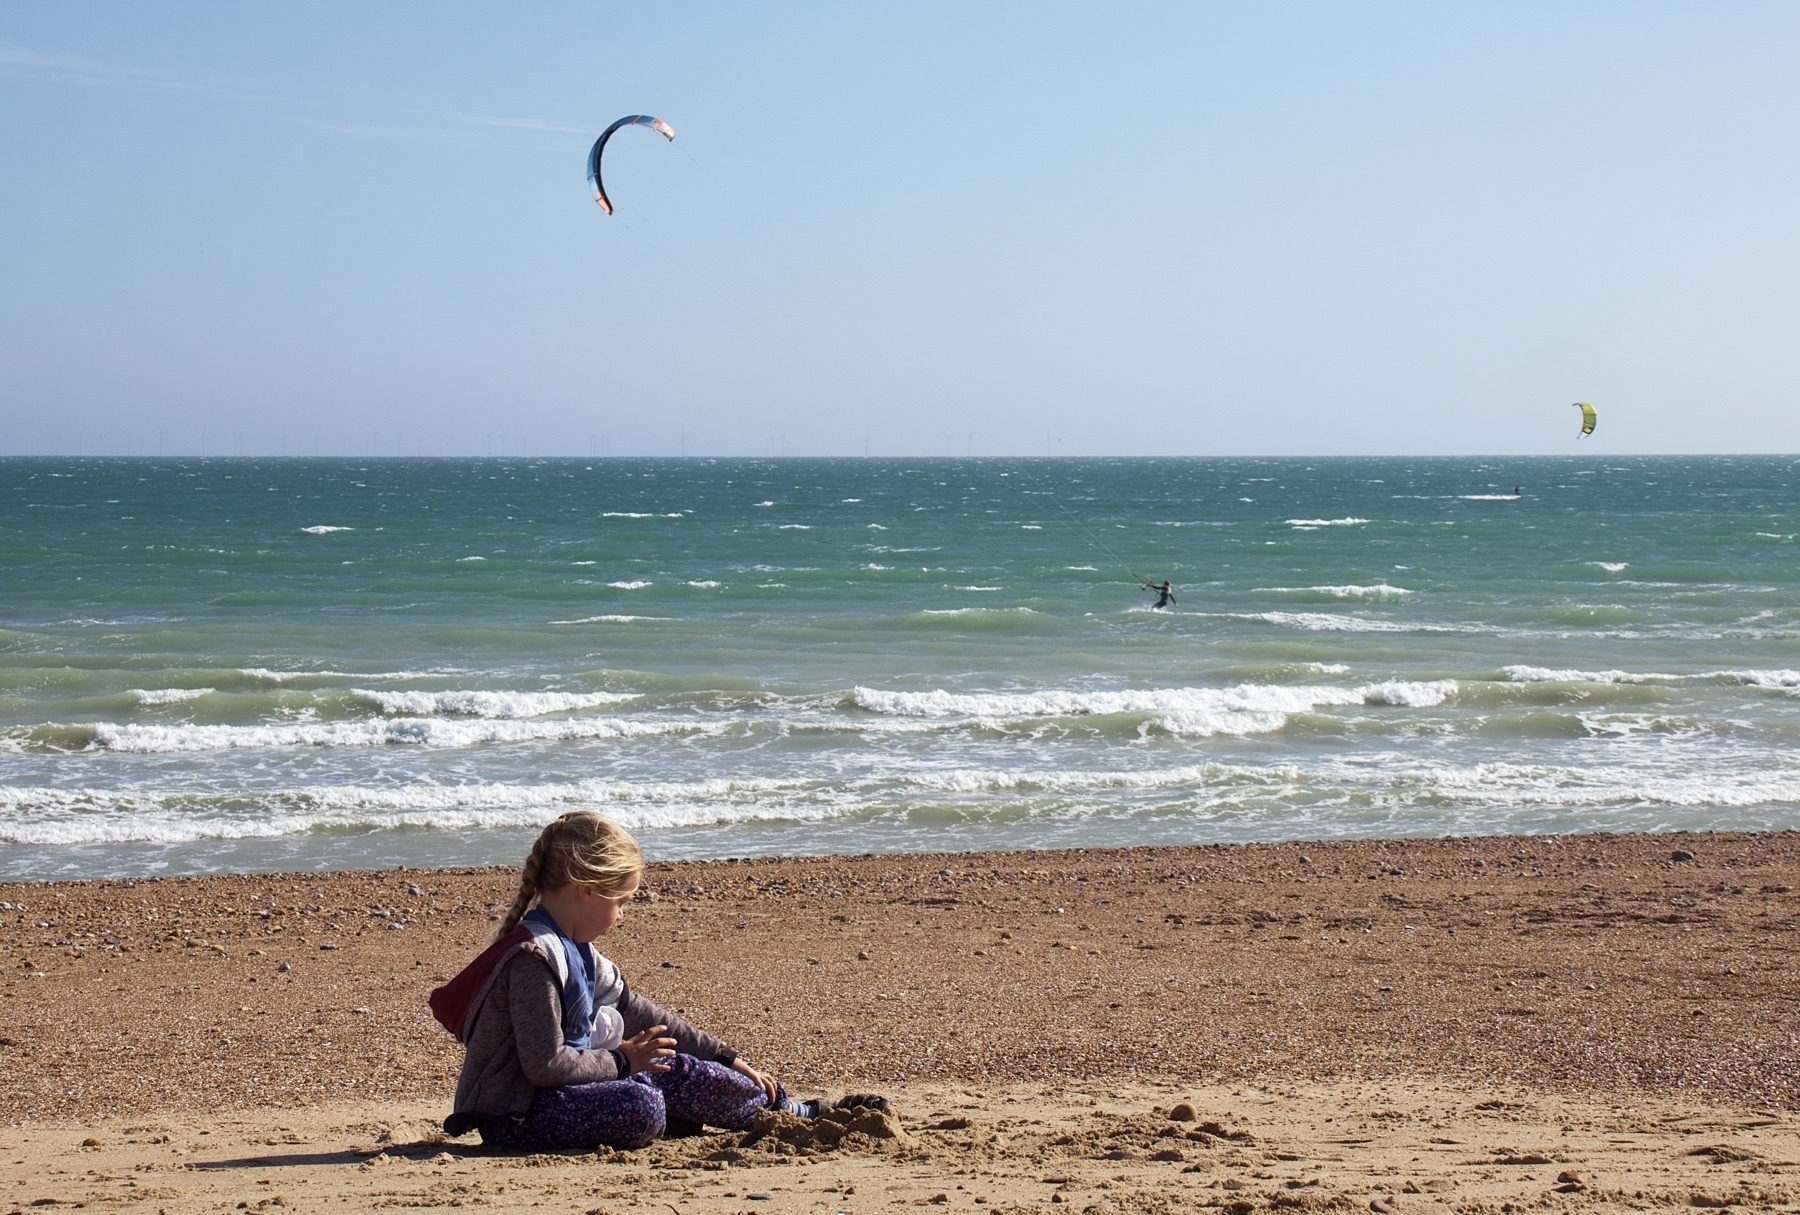 A girl plays on the sand, with a kite surfer in the distance. 